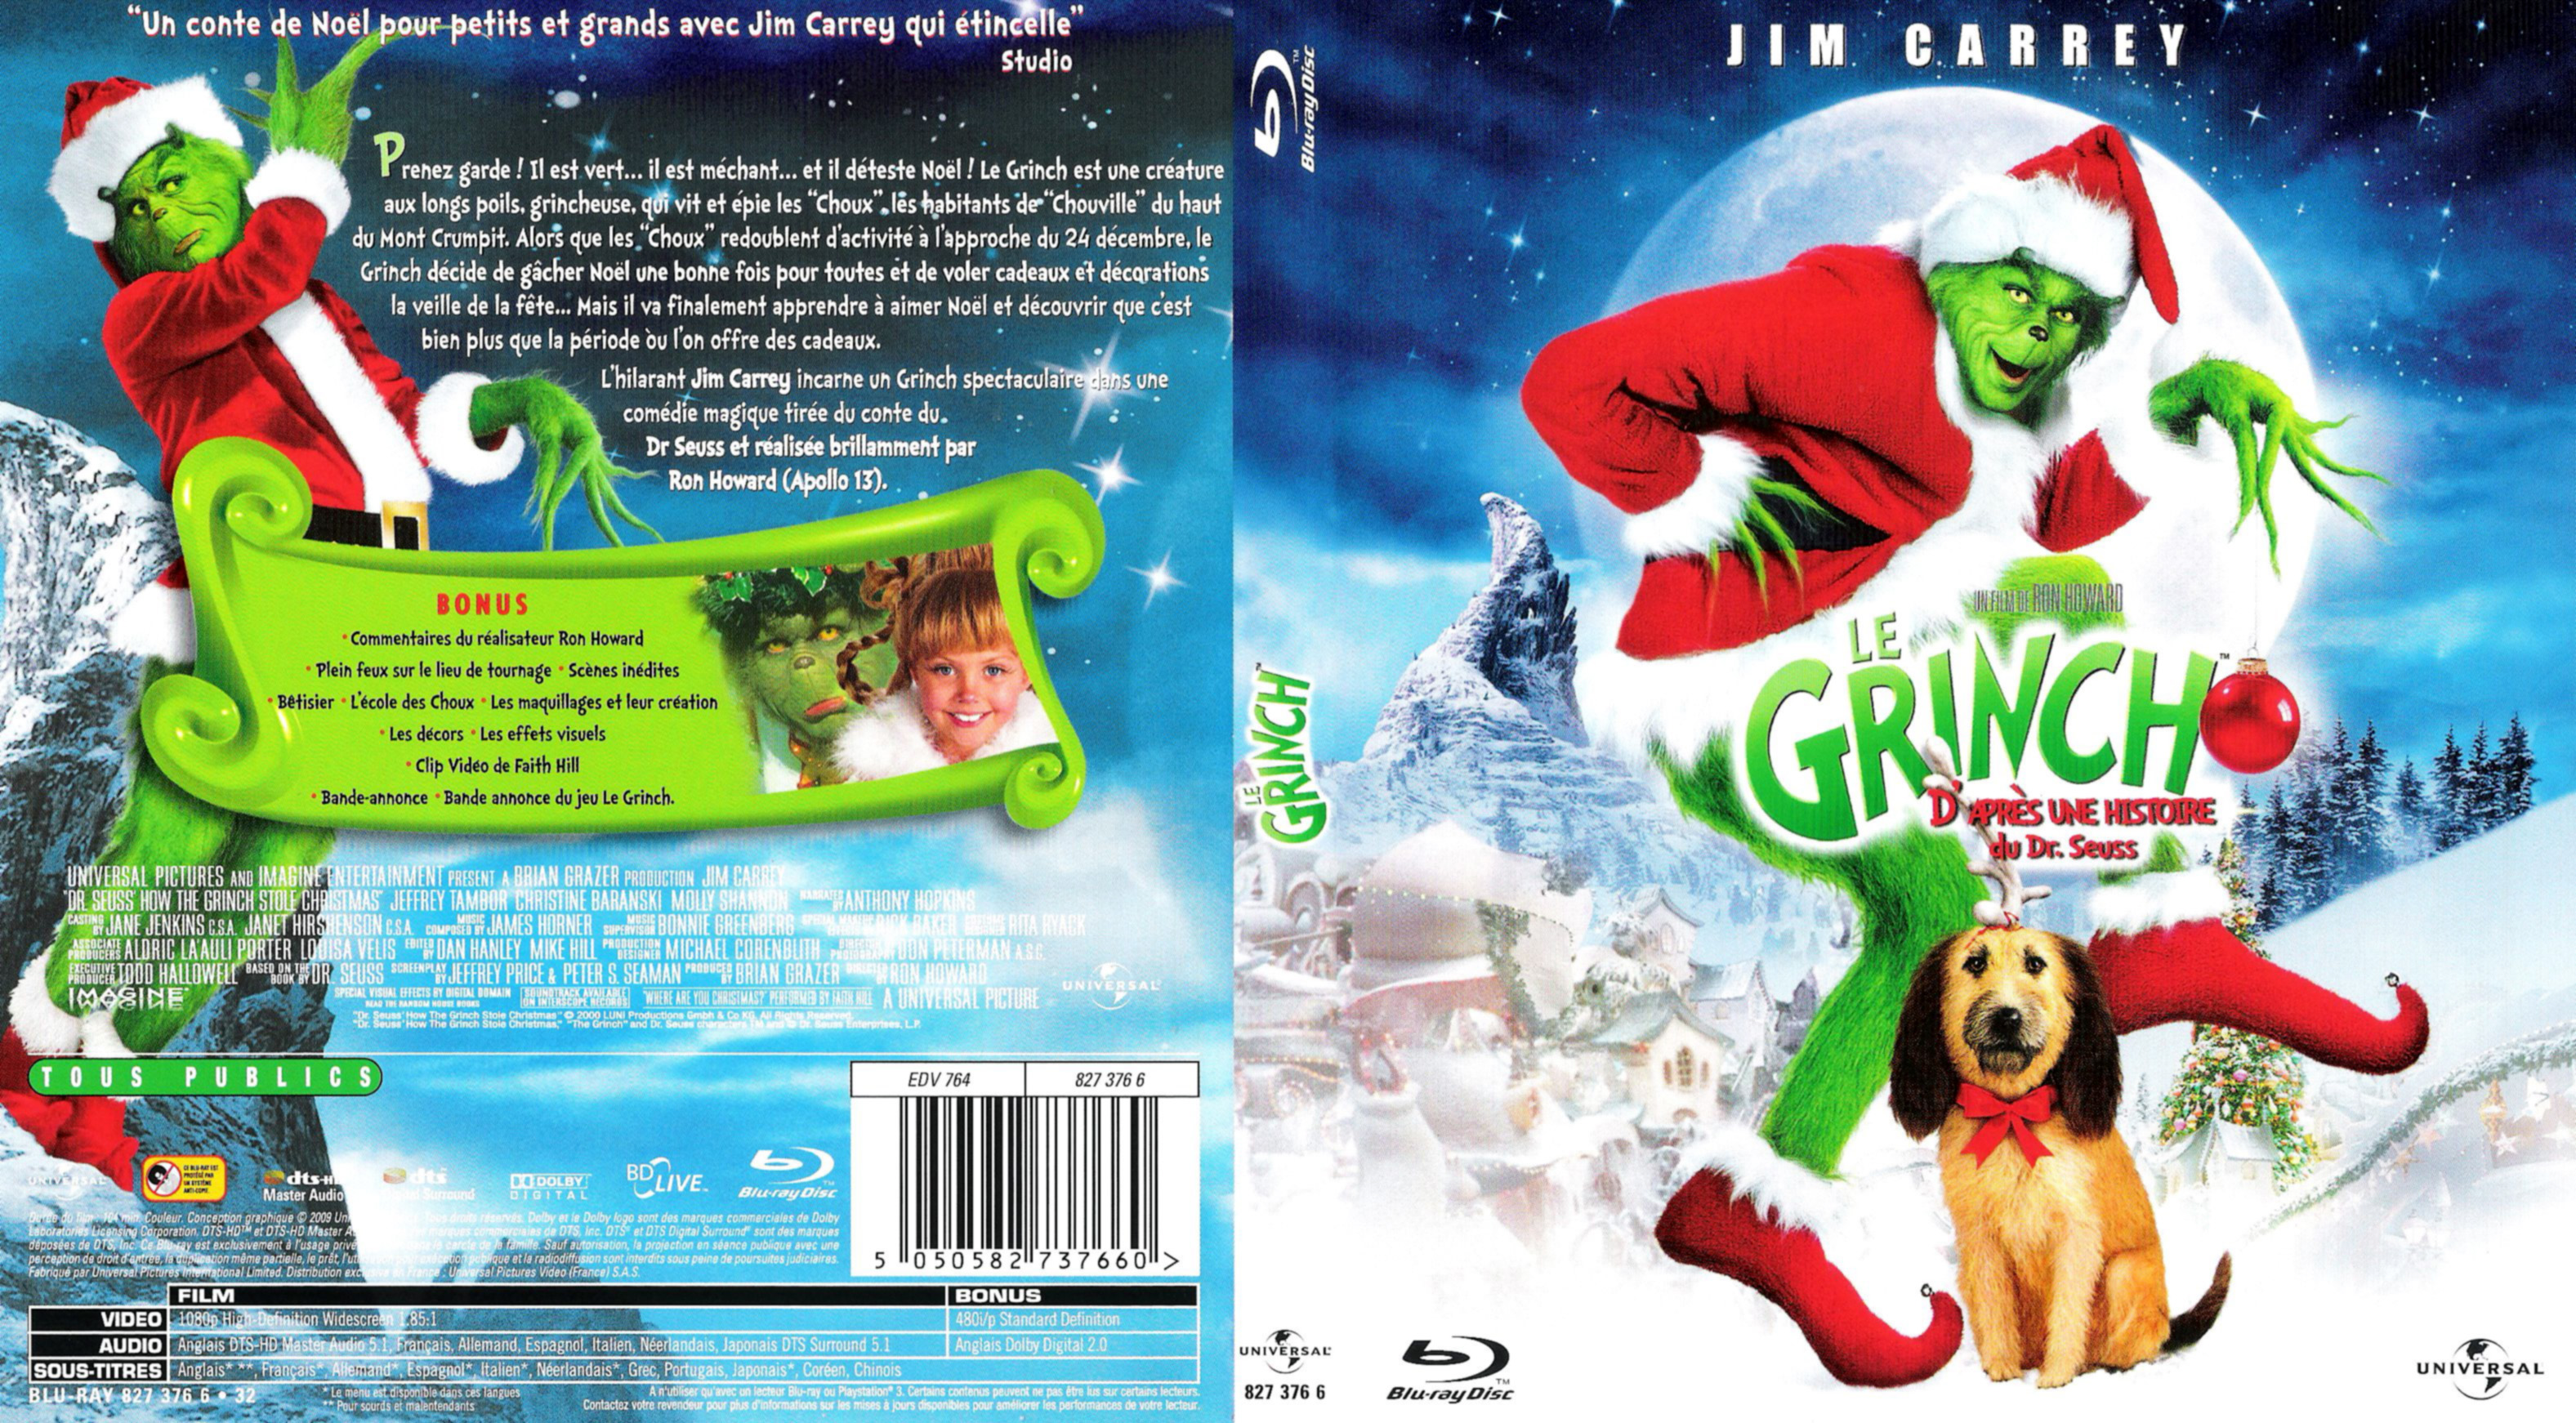 Jaquette DVD Le grinch (BLU-RAY)